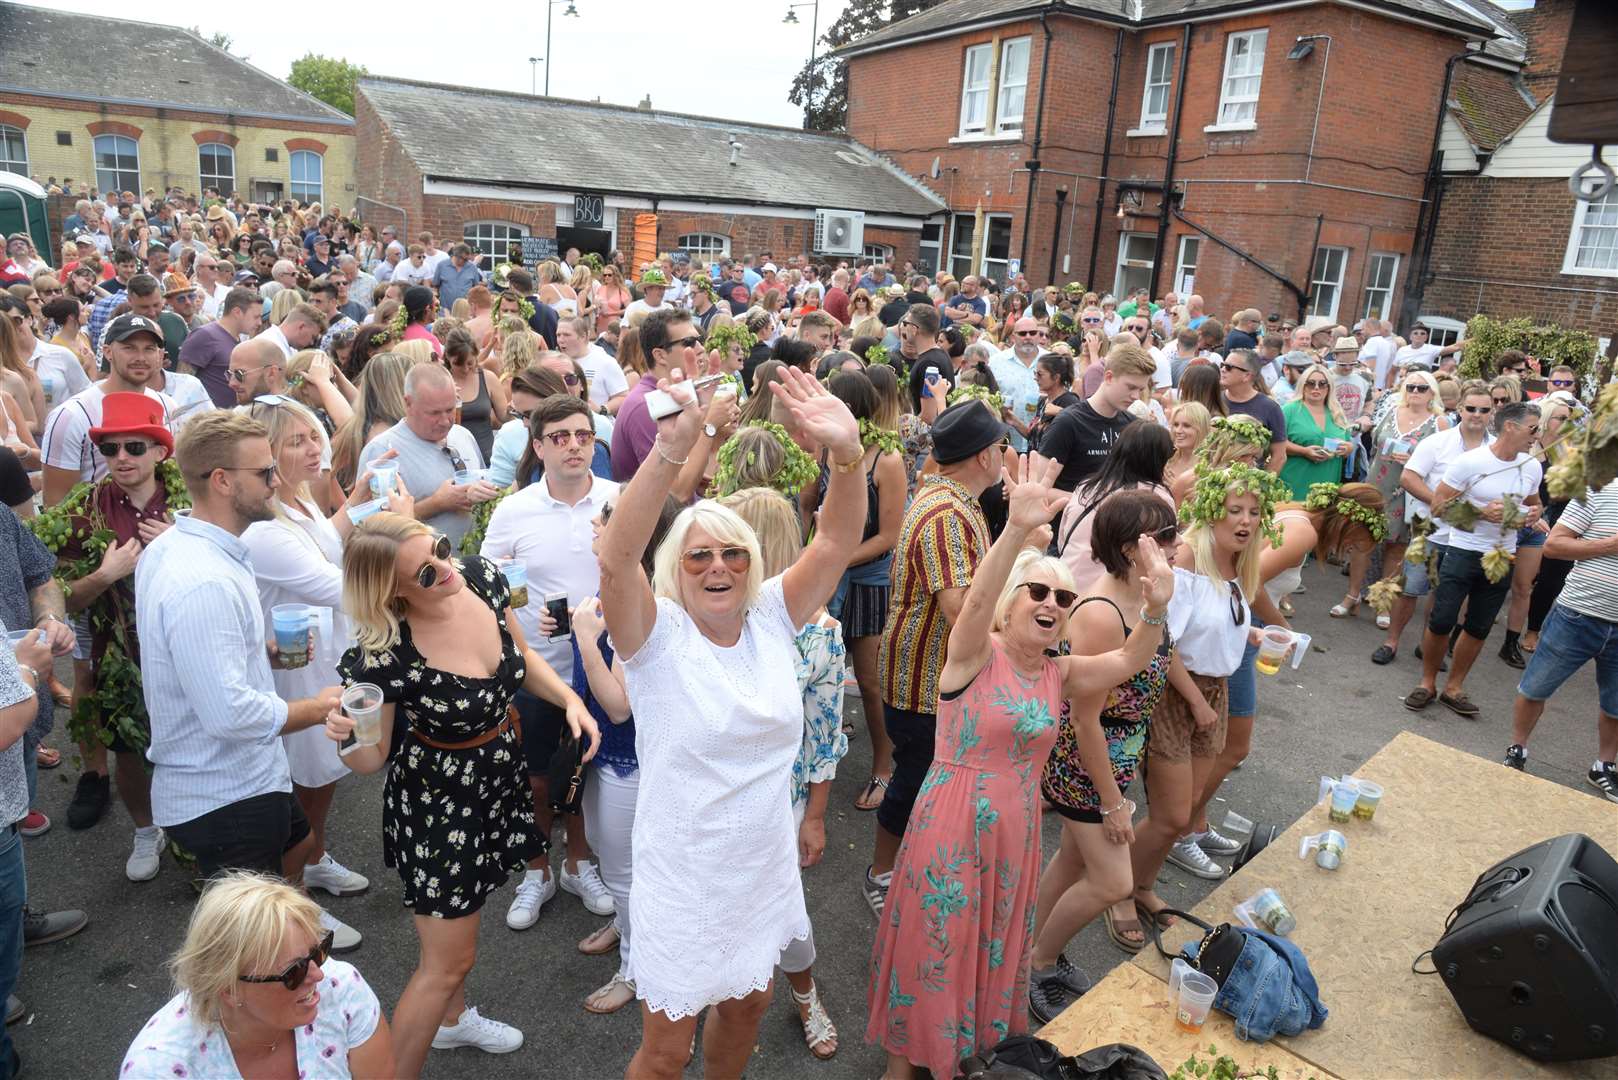 The packed courtyard as Tundra perform at The Railway Hotel during the 2019 Faversham Hop Festival